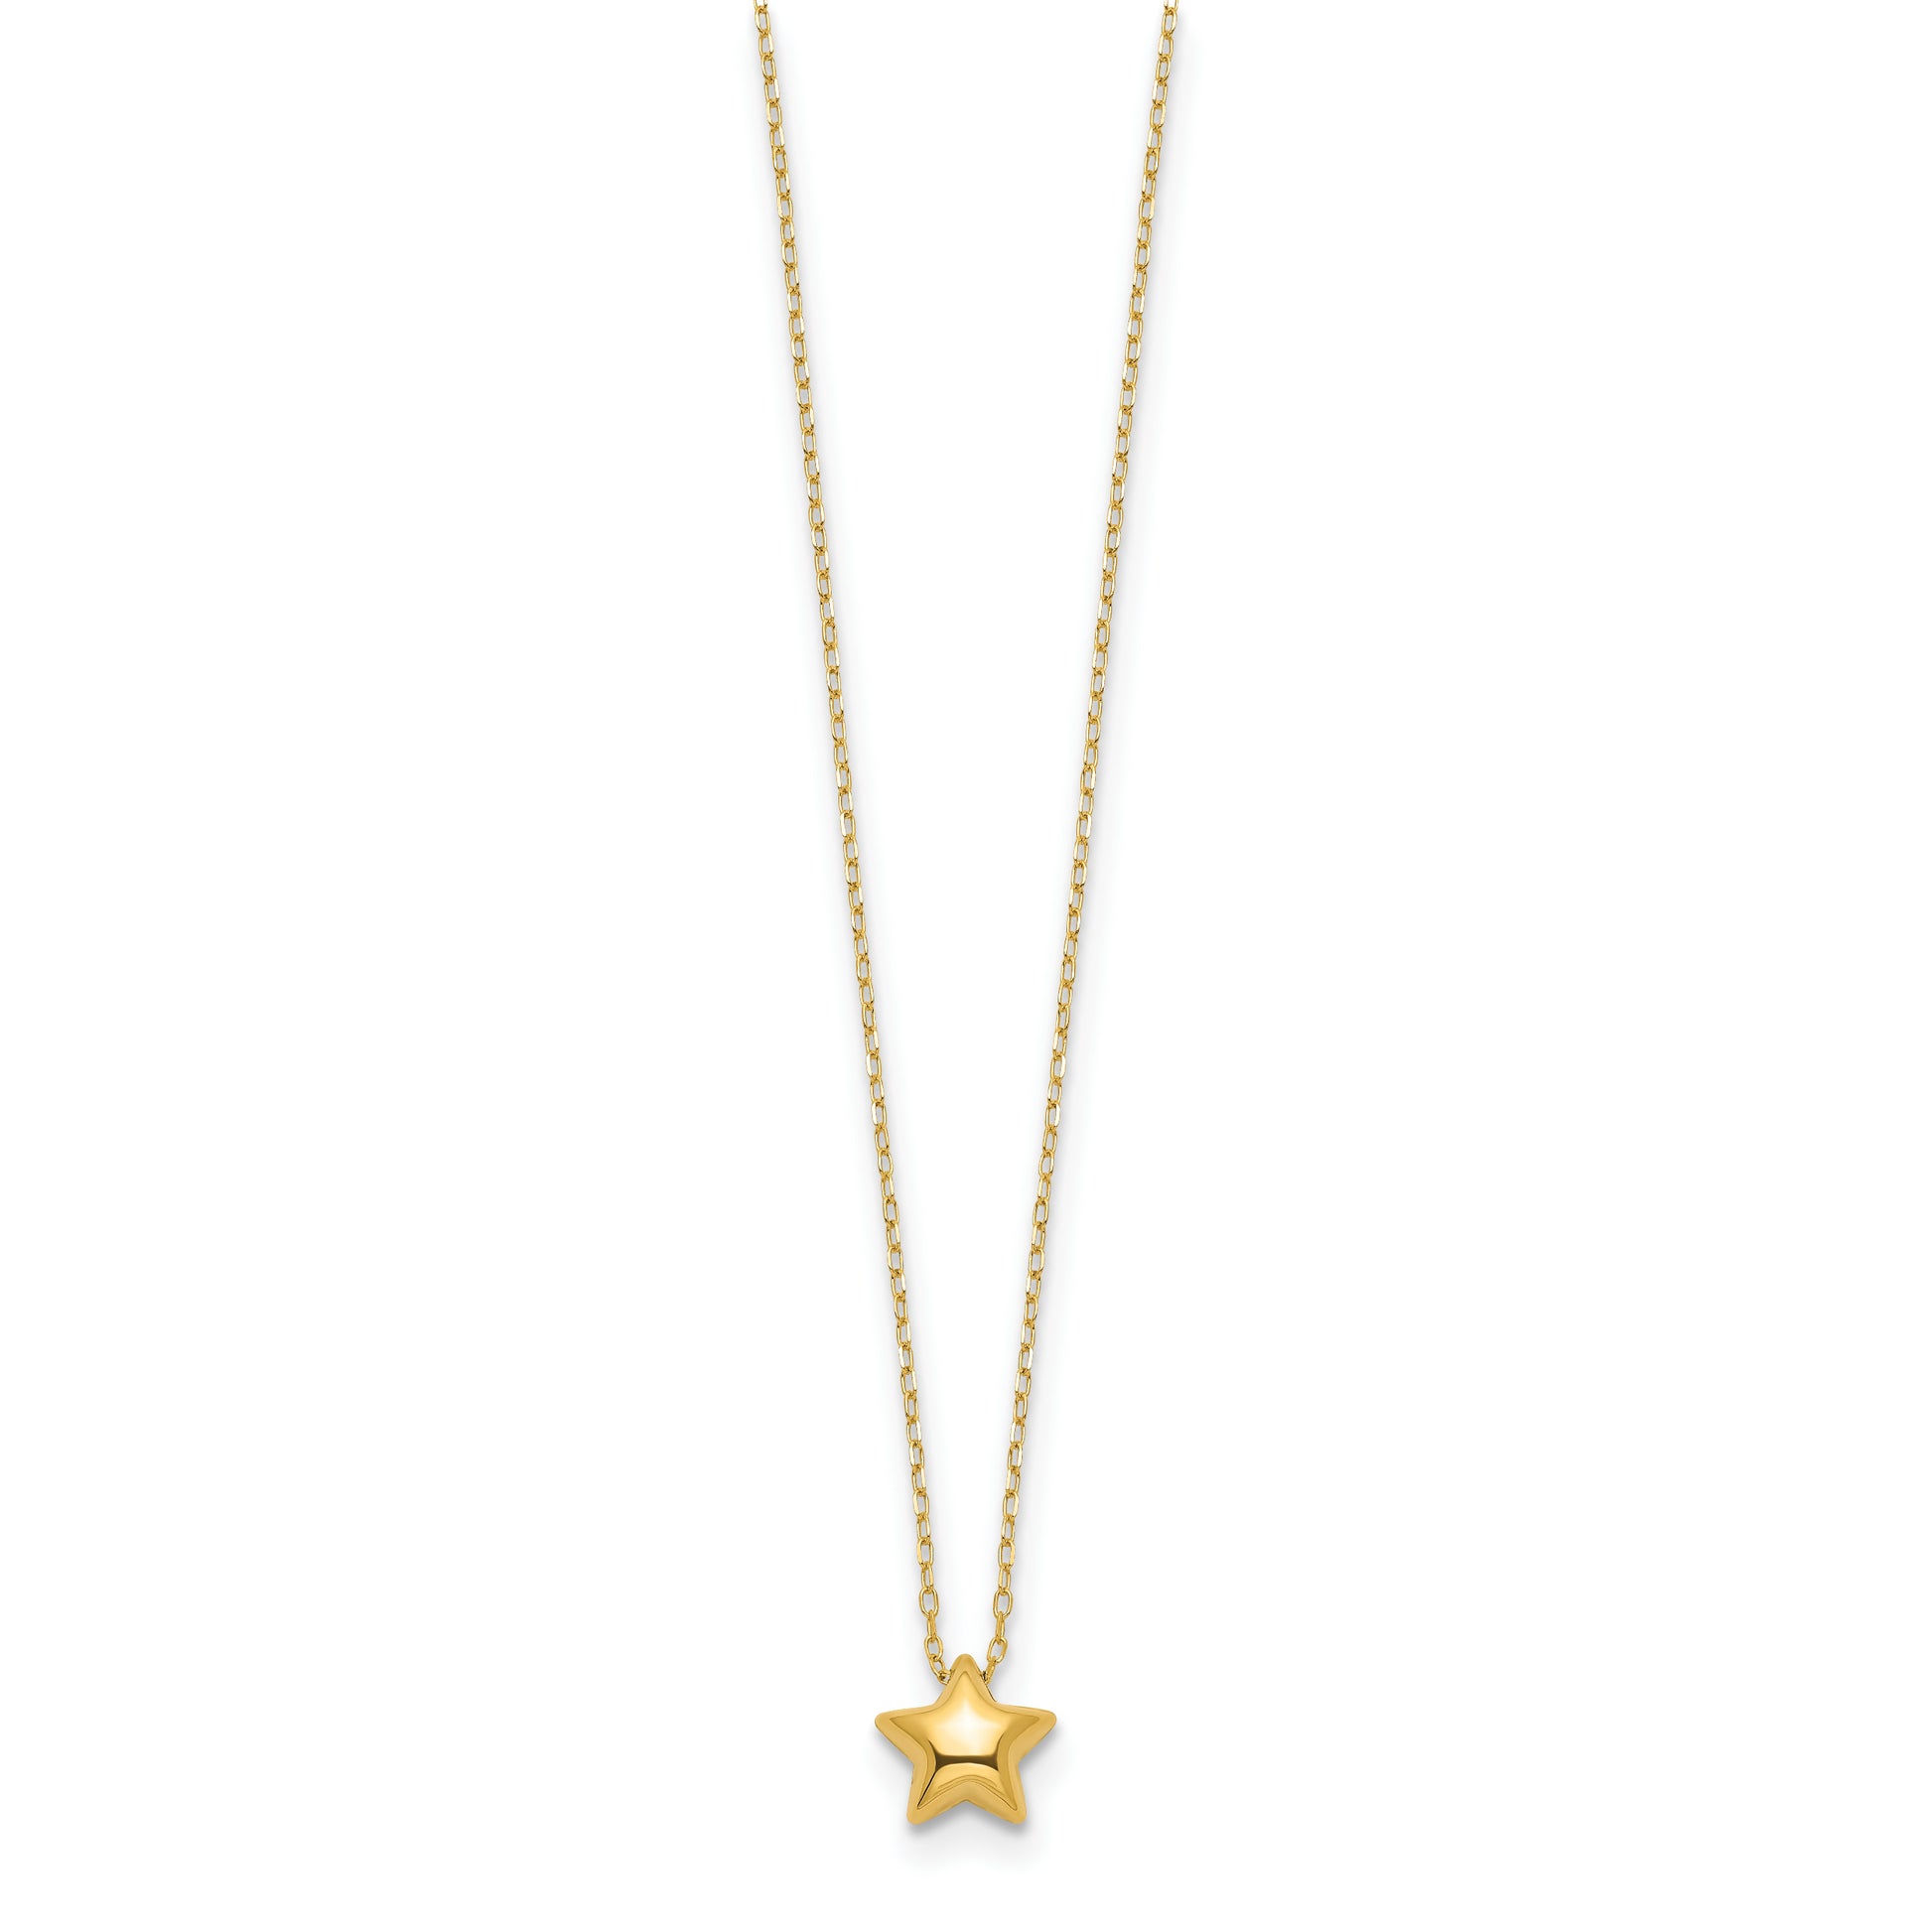 14k Polished Puffed Star 16.5in Necklace